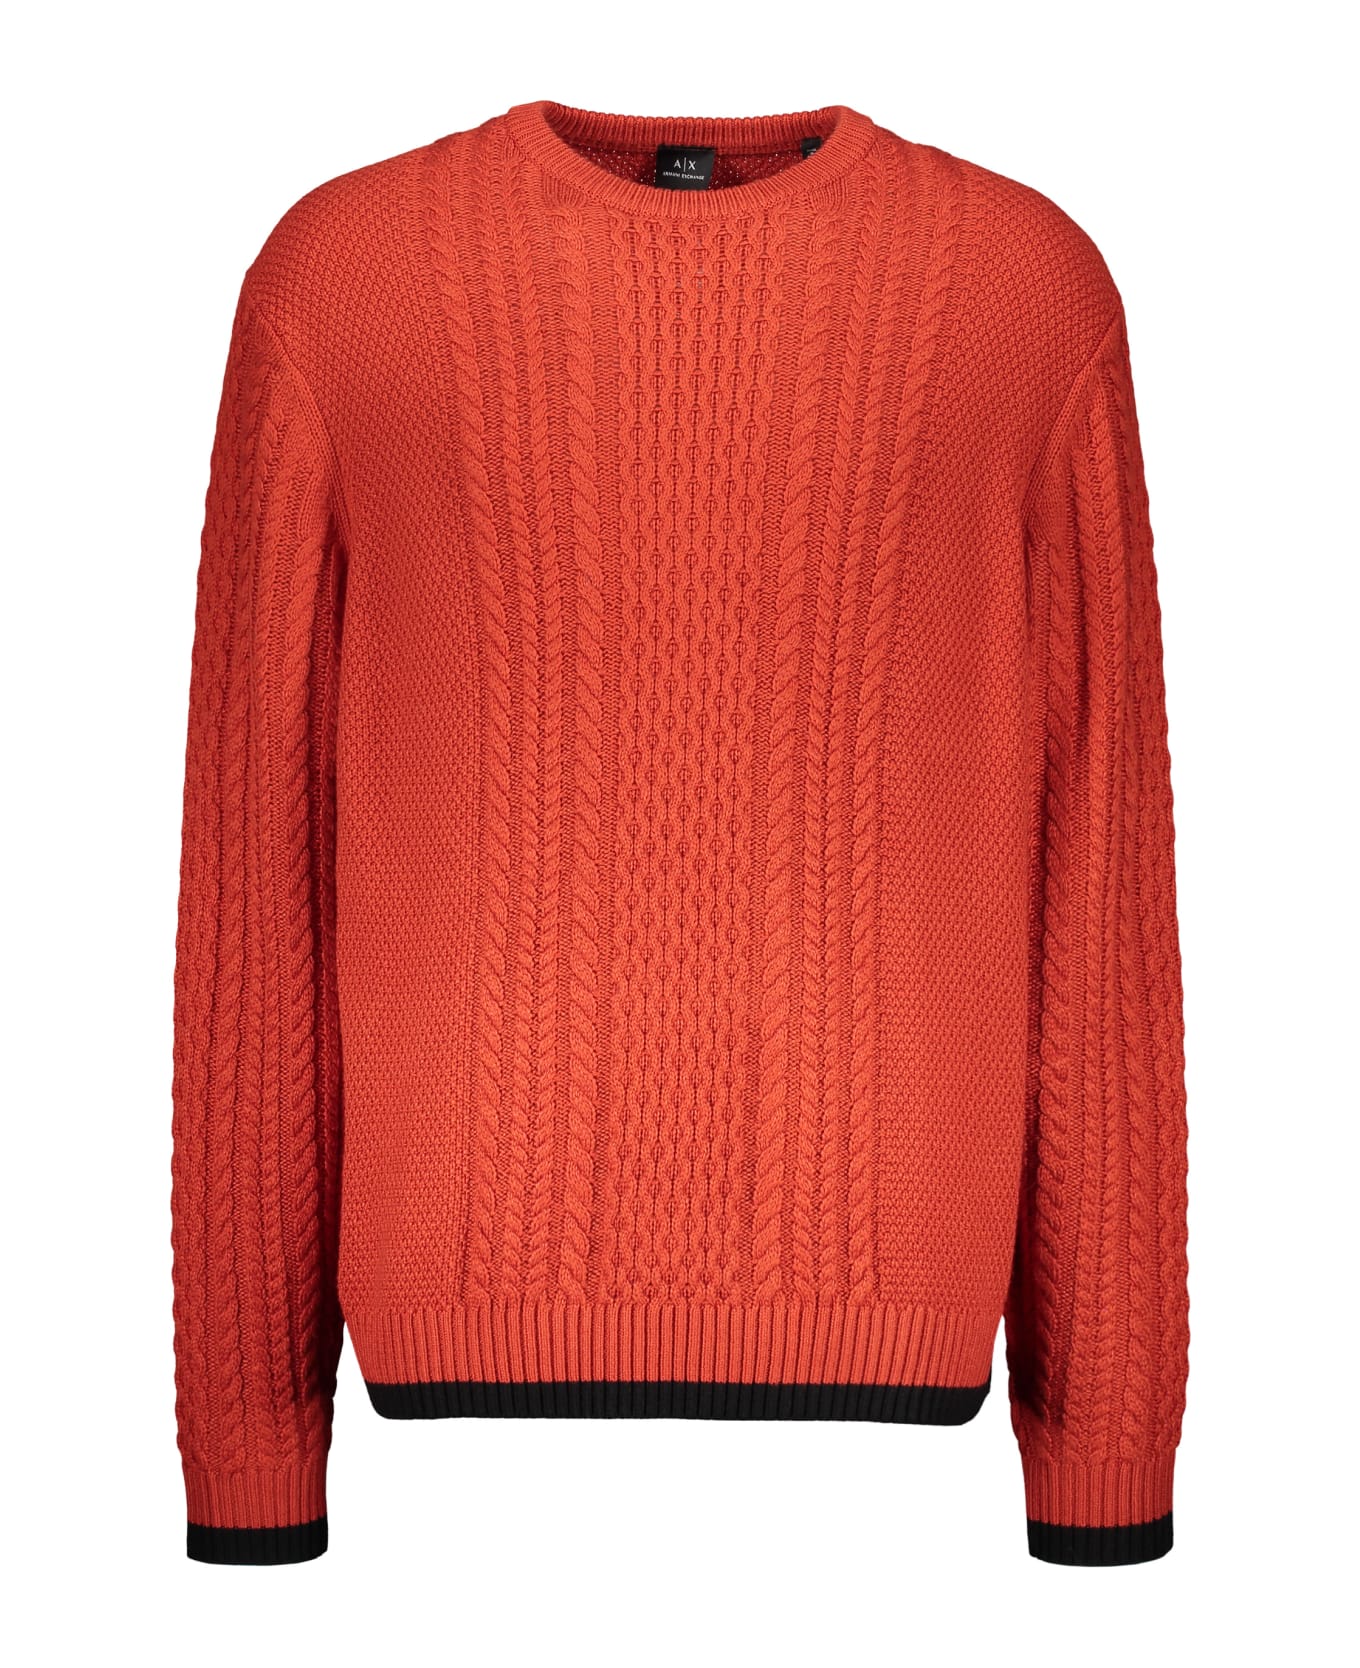 Armani Exchange Cable Knit Sweater - Copper ニットウェア